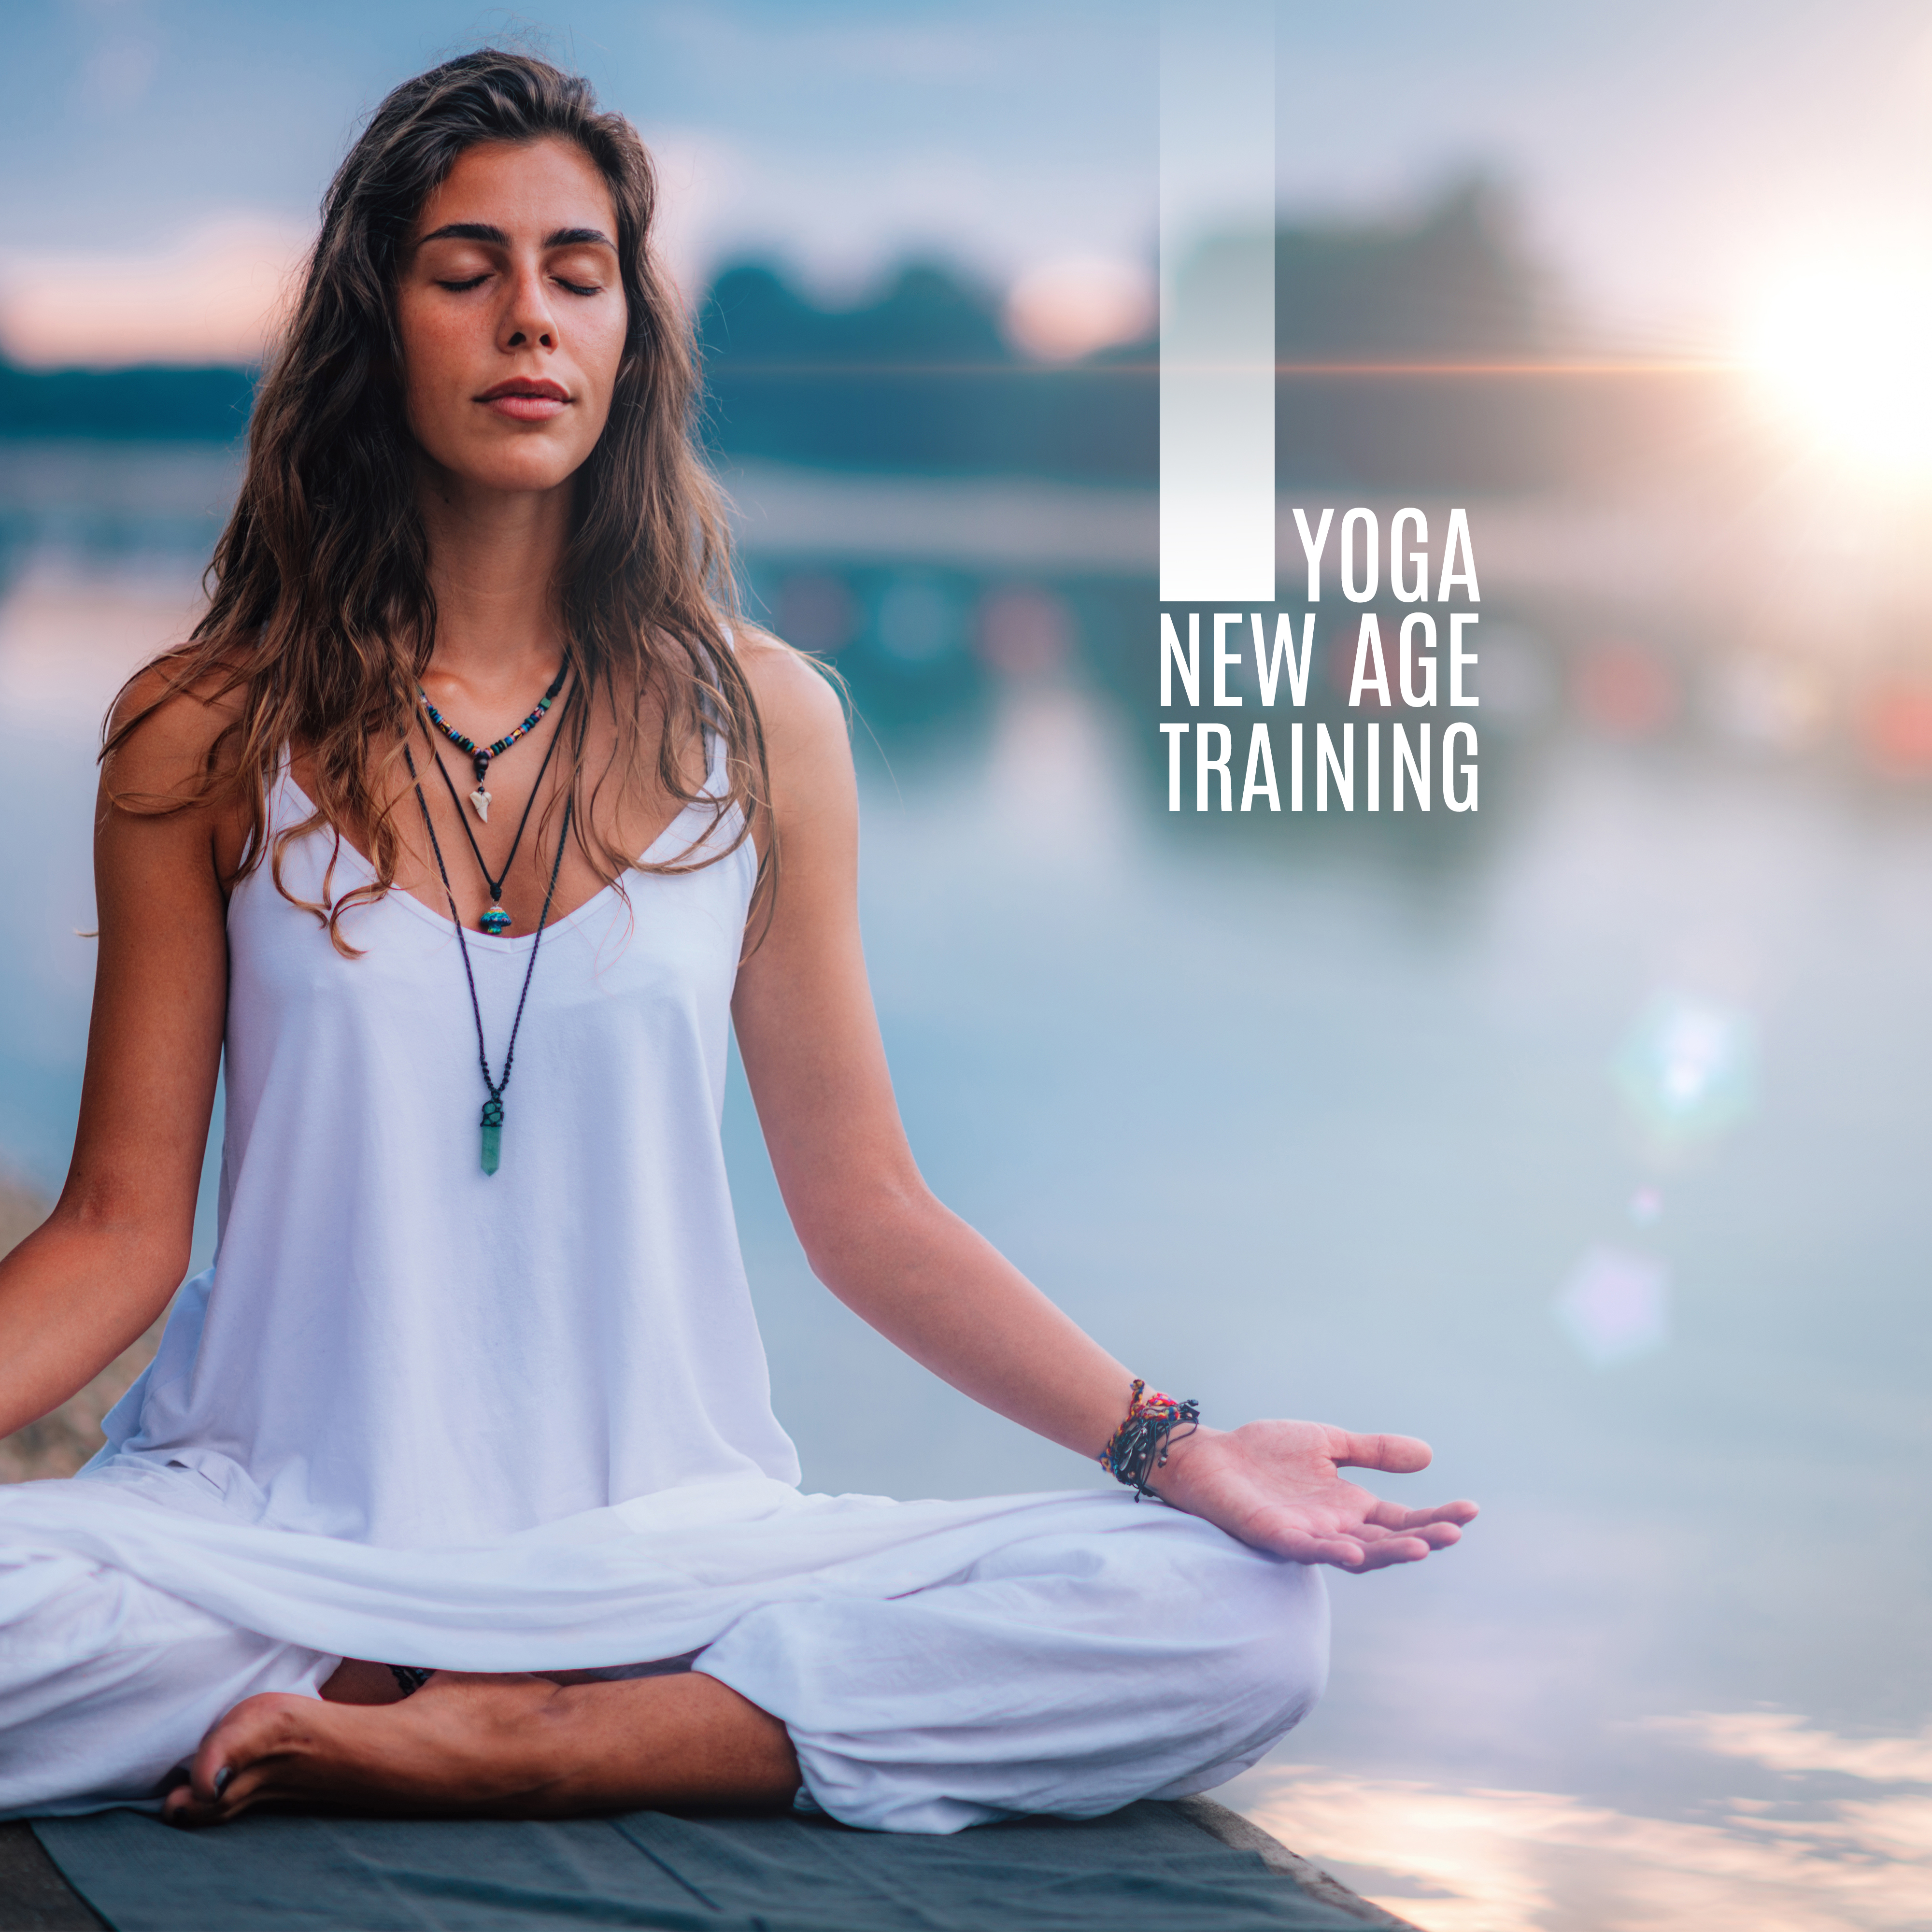 Yoga New Age Training: Perfect New Age Music Compilation for Meditation, Cosmic & Nature Sounds